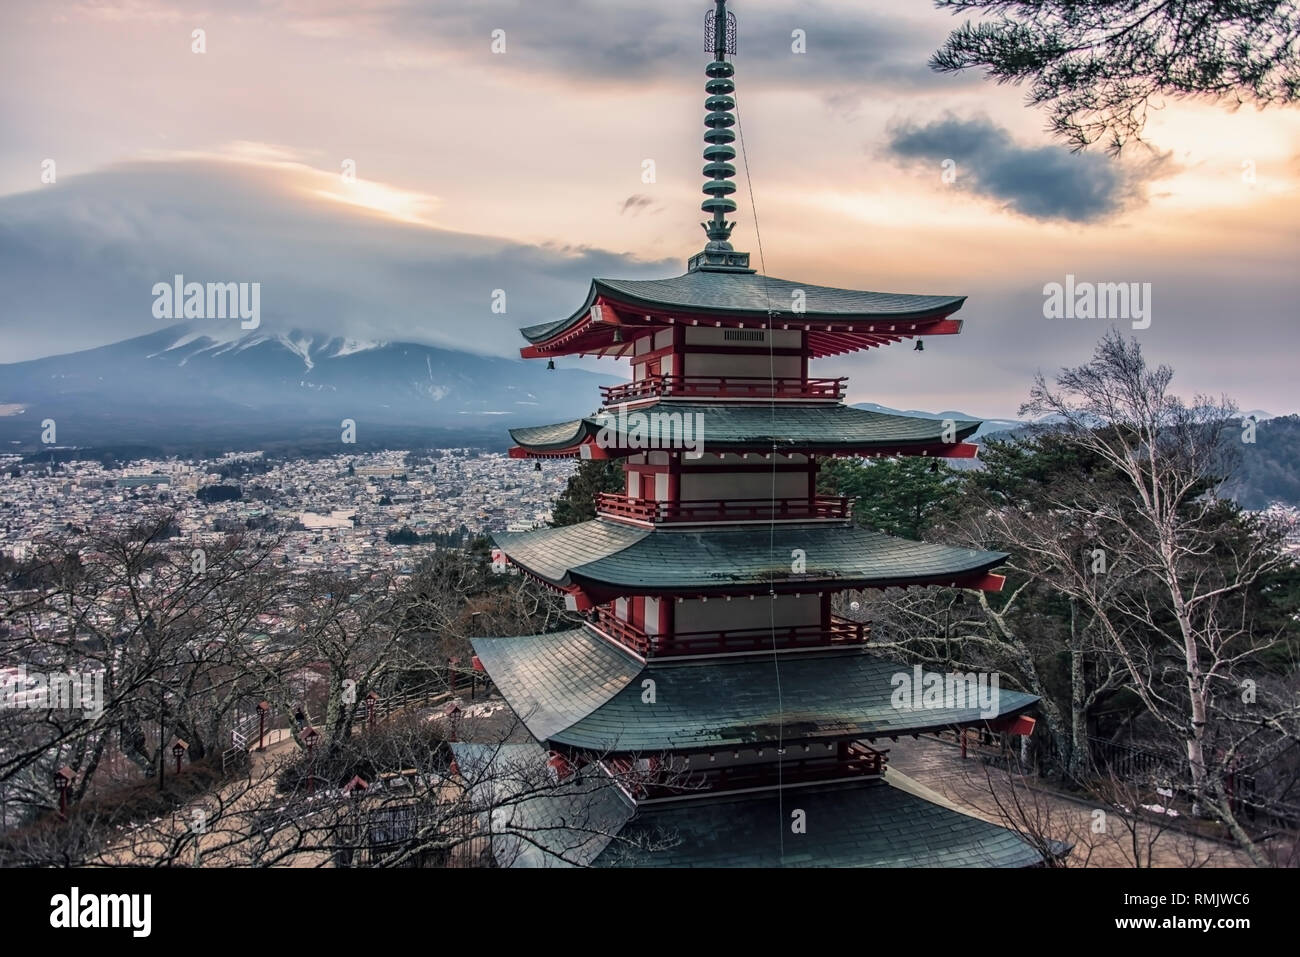 Famous Place of Japan with Chureito pagoda and Mount Fuji at sunset Stock Photo